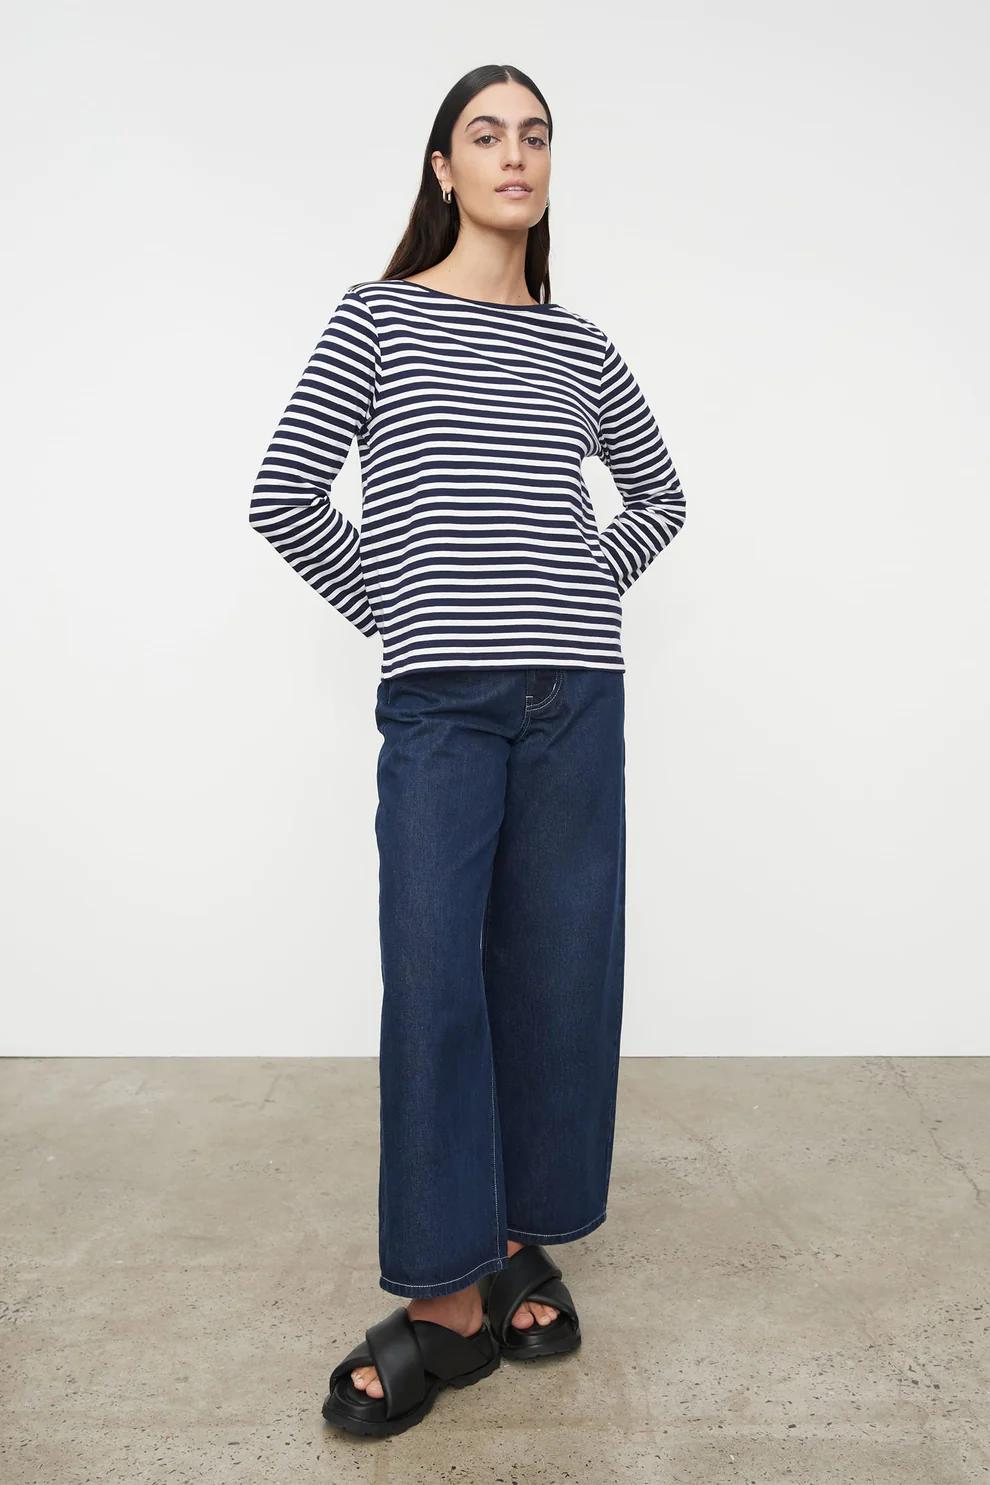 Product Image for Breton Top, Navy Stripe